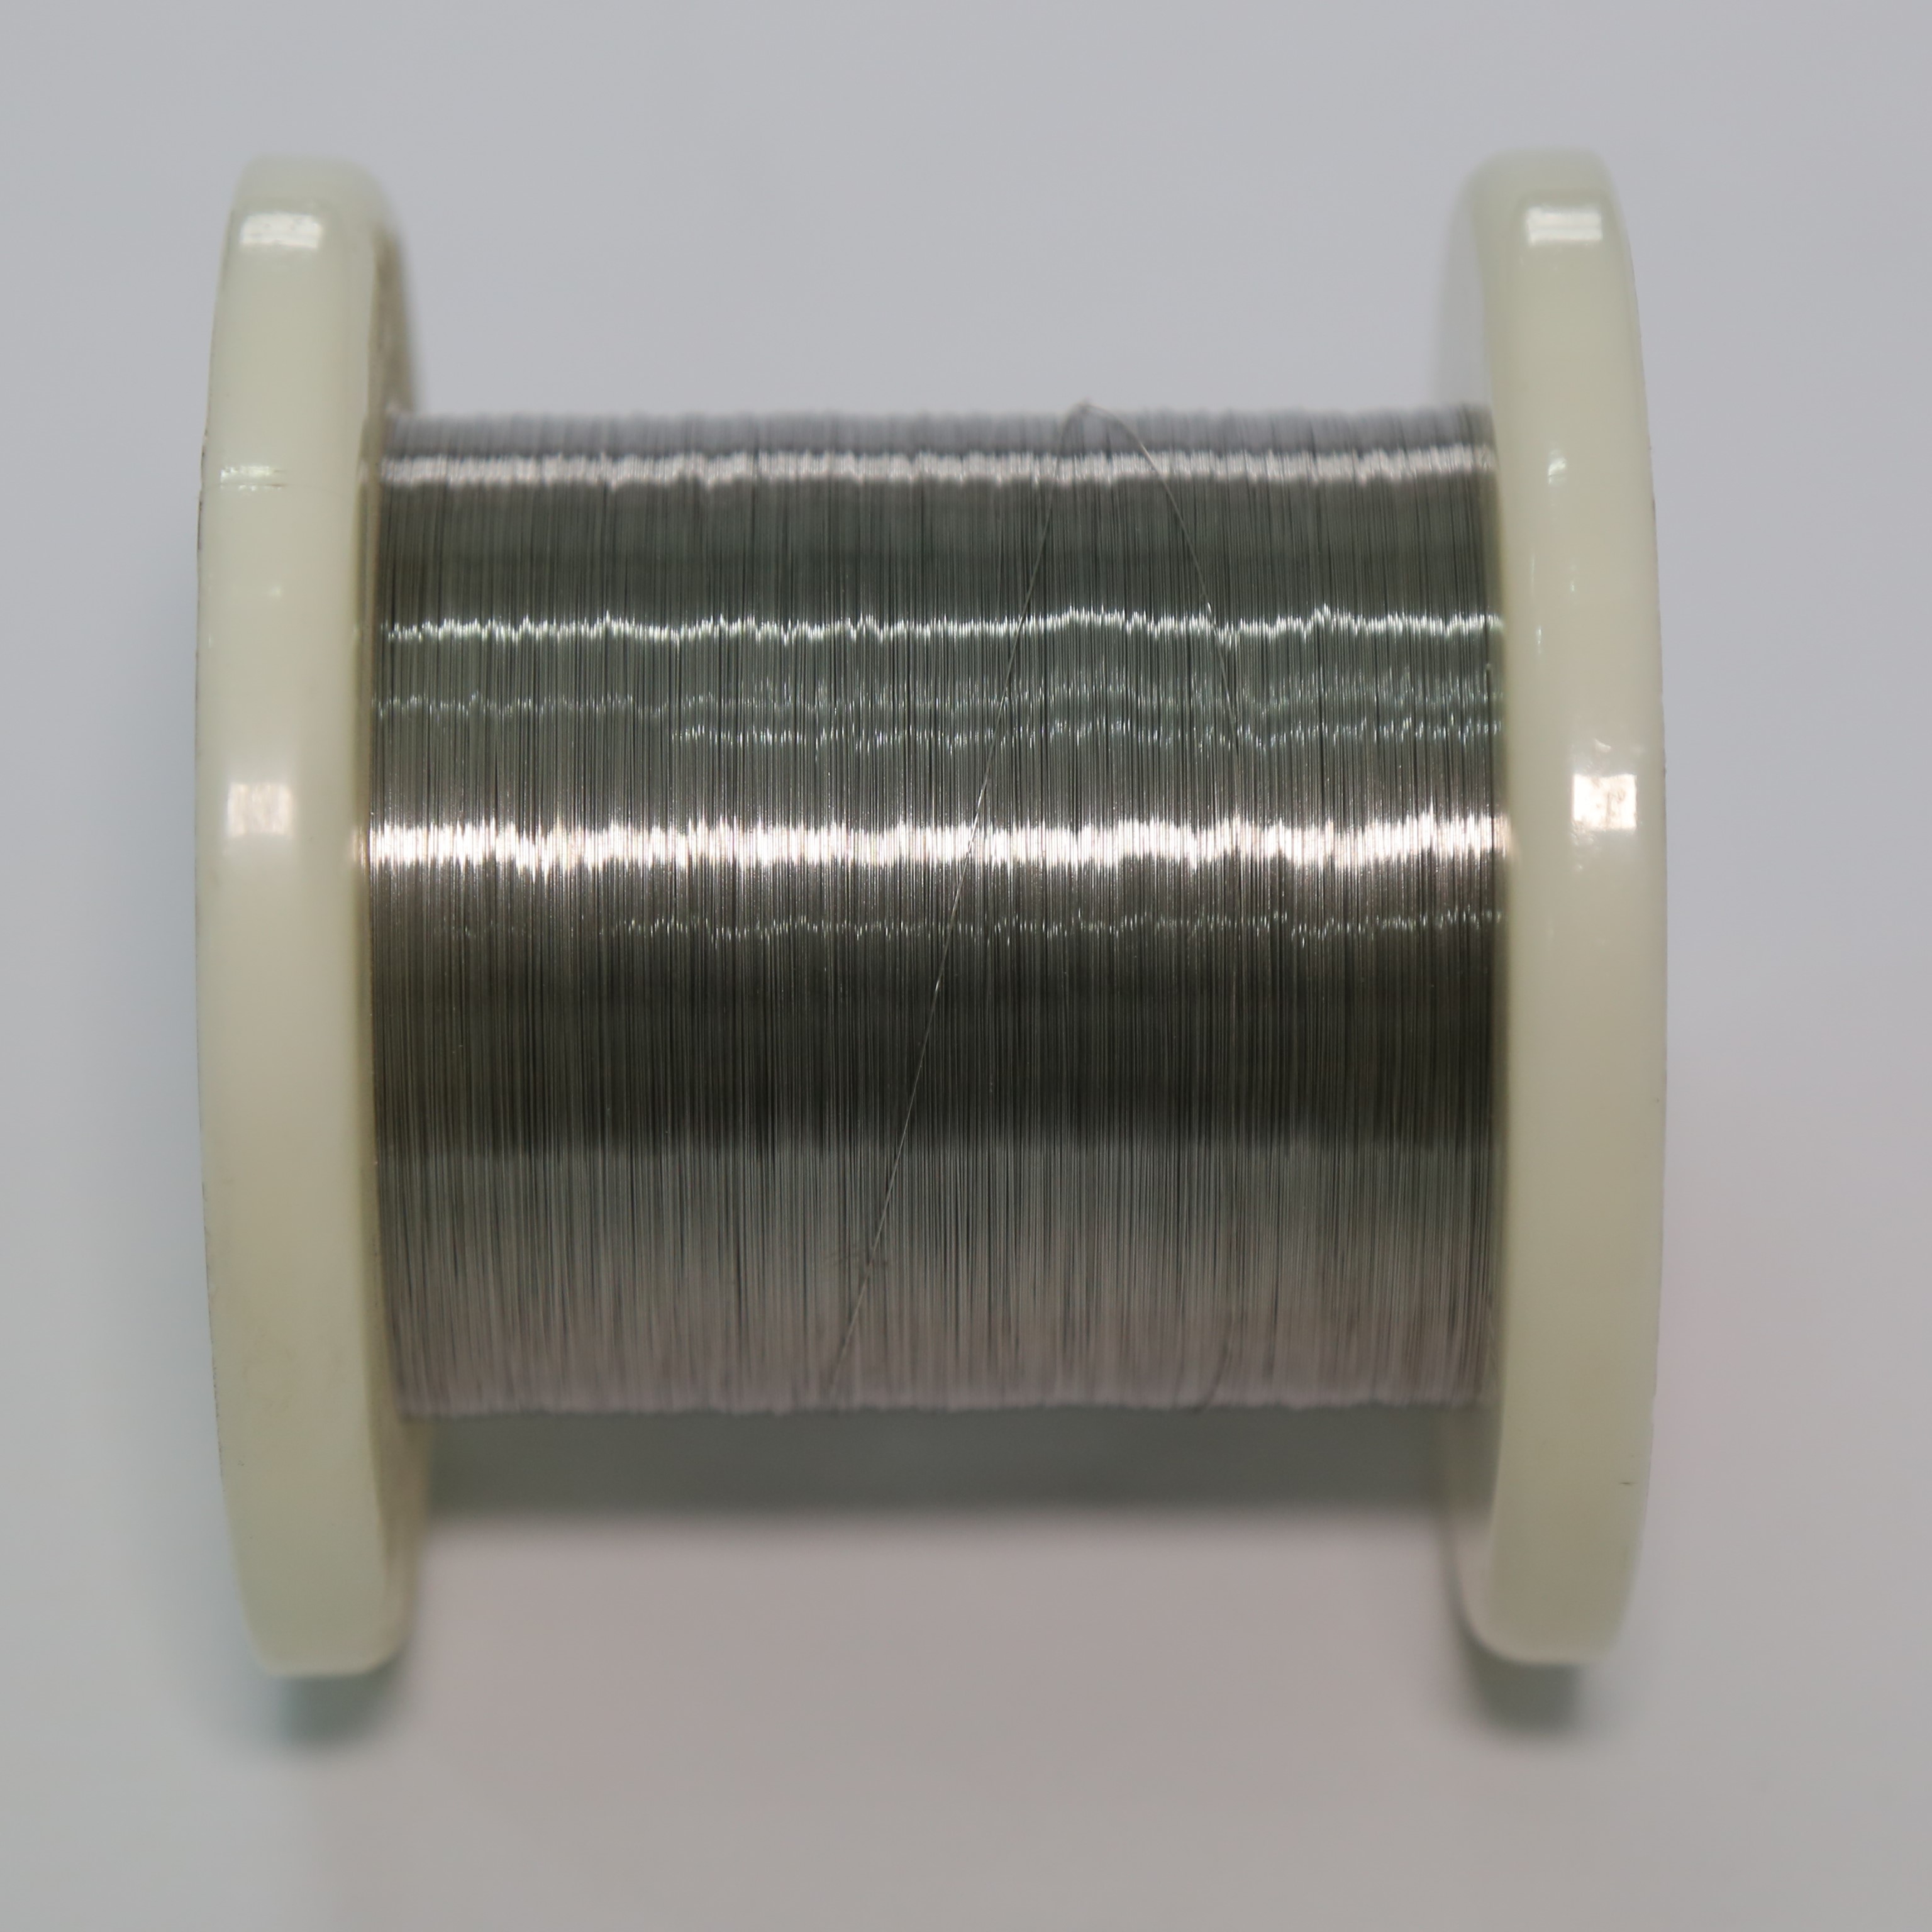 CuNi44 Copper-based low resistance heating alloy wire